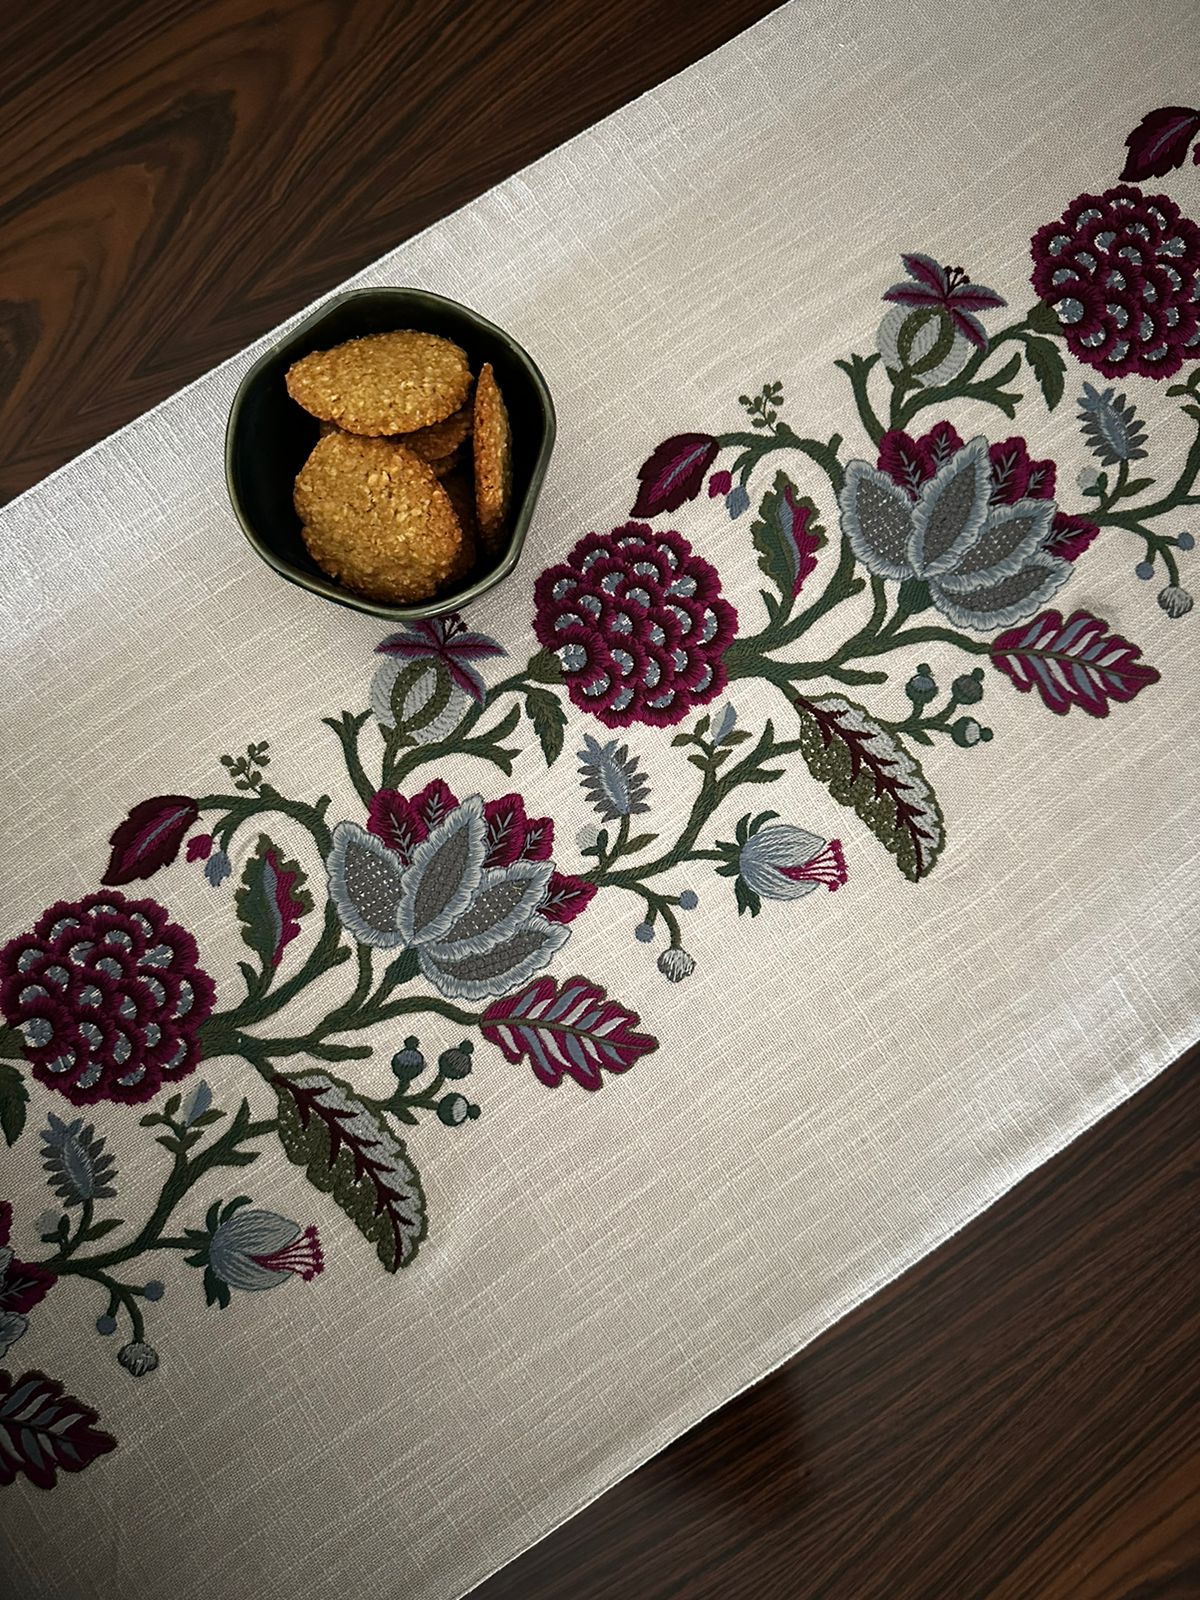 SAND FLORAL WINE EMBROIDERY TABLE RUNNER WITH TASSLES